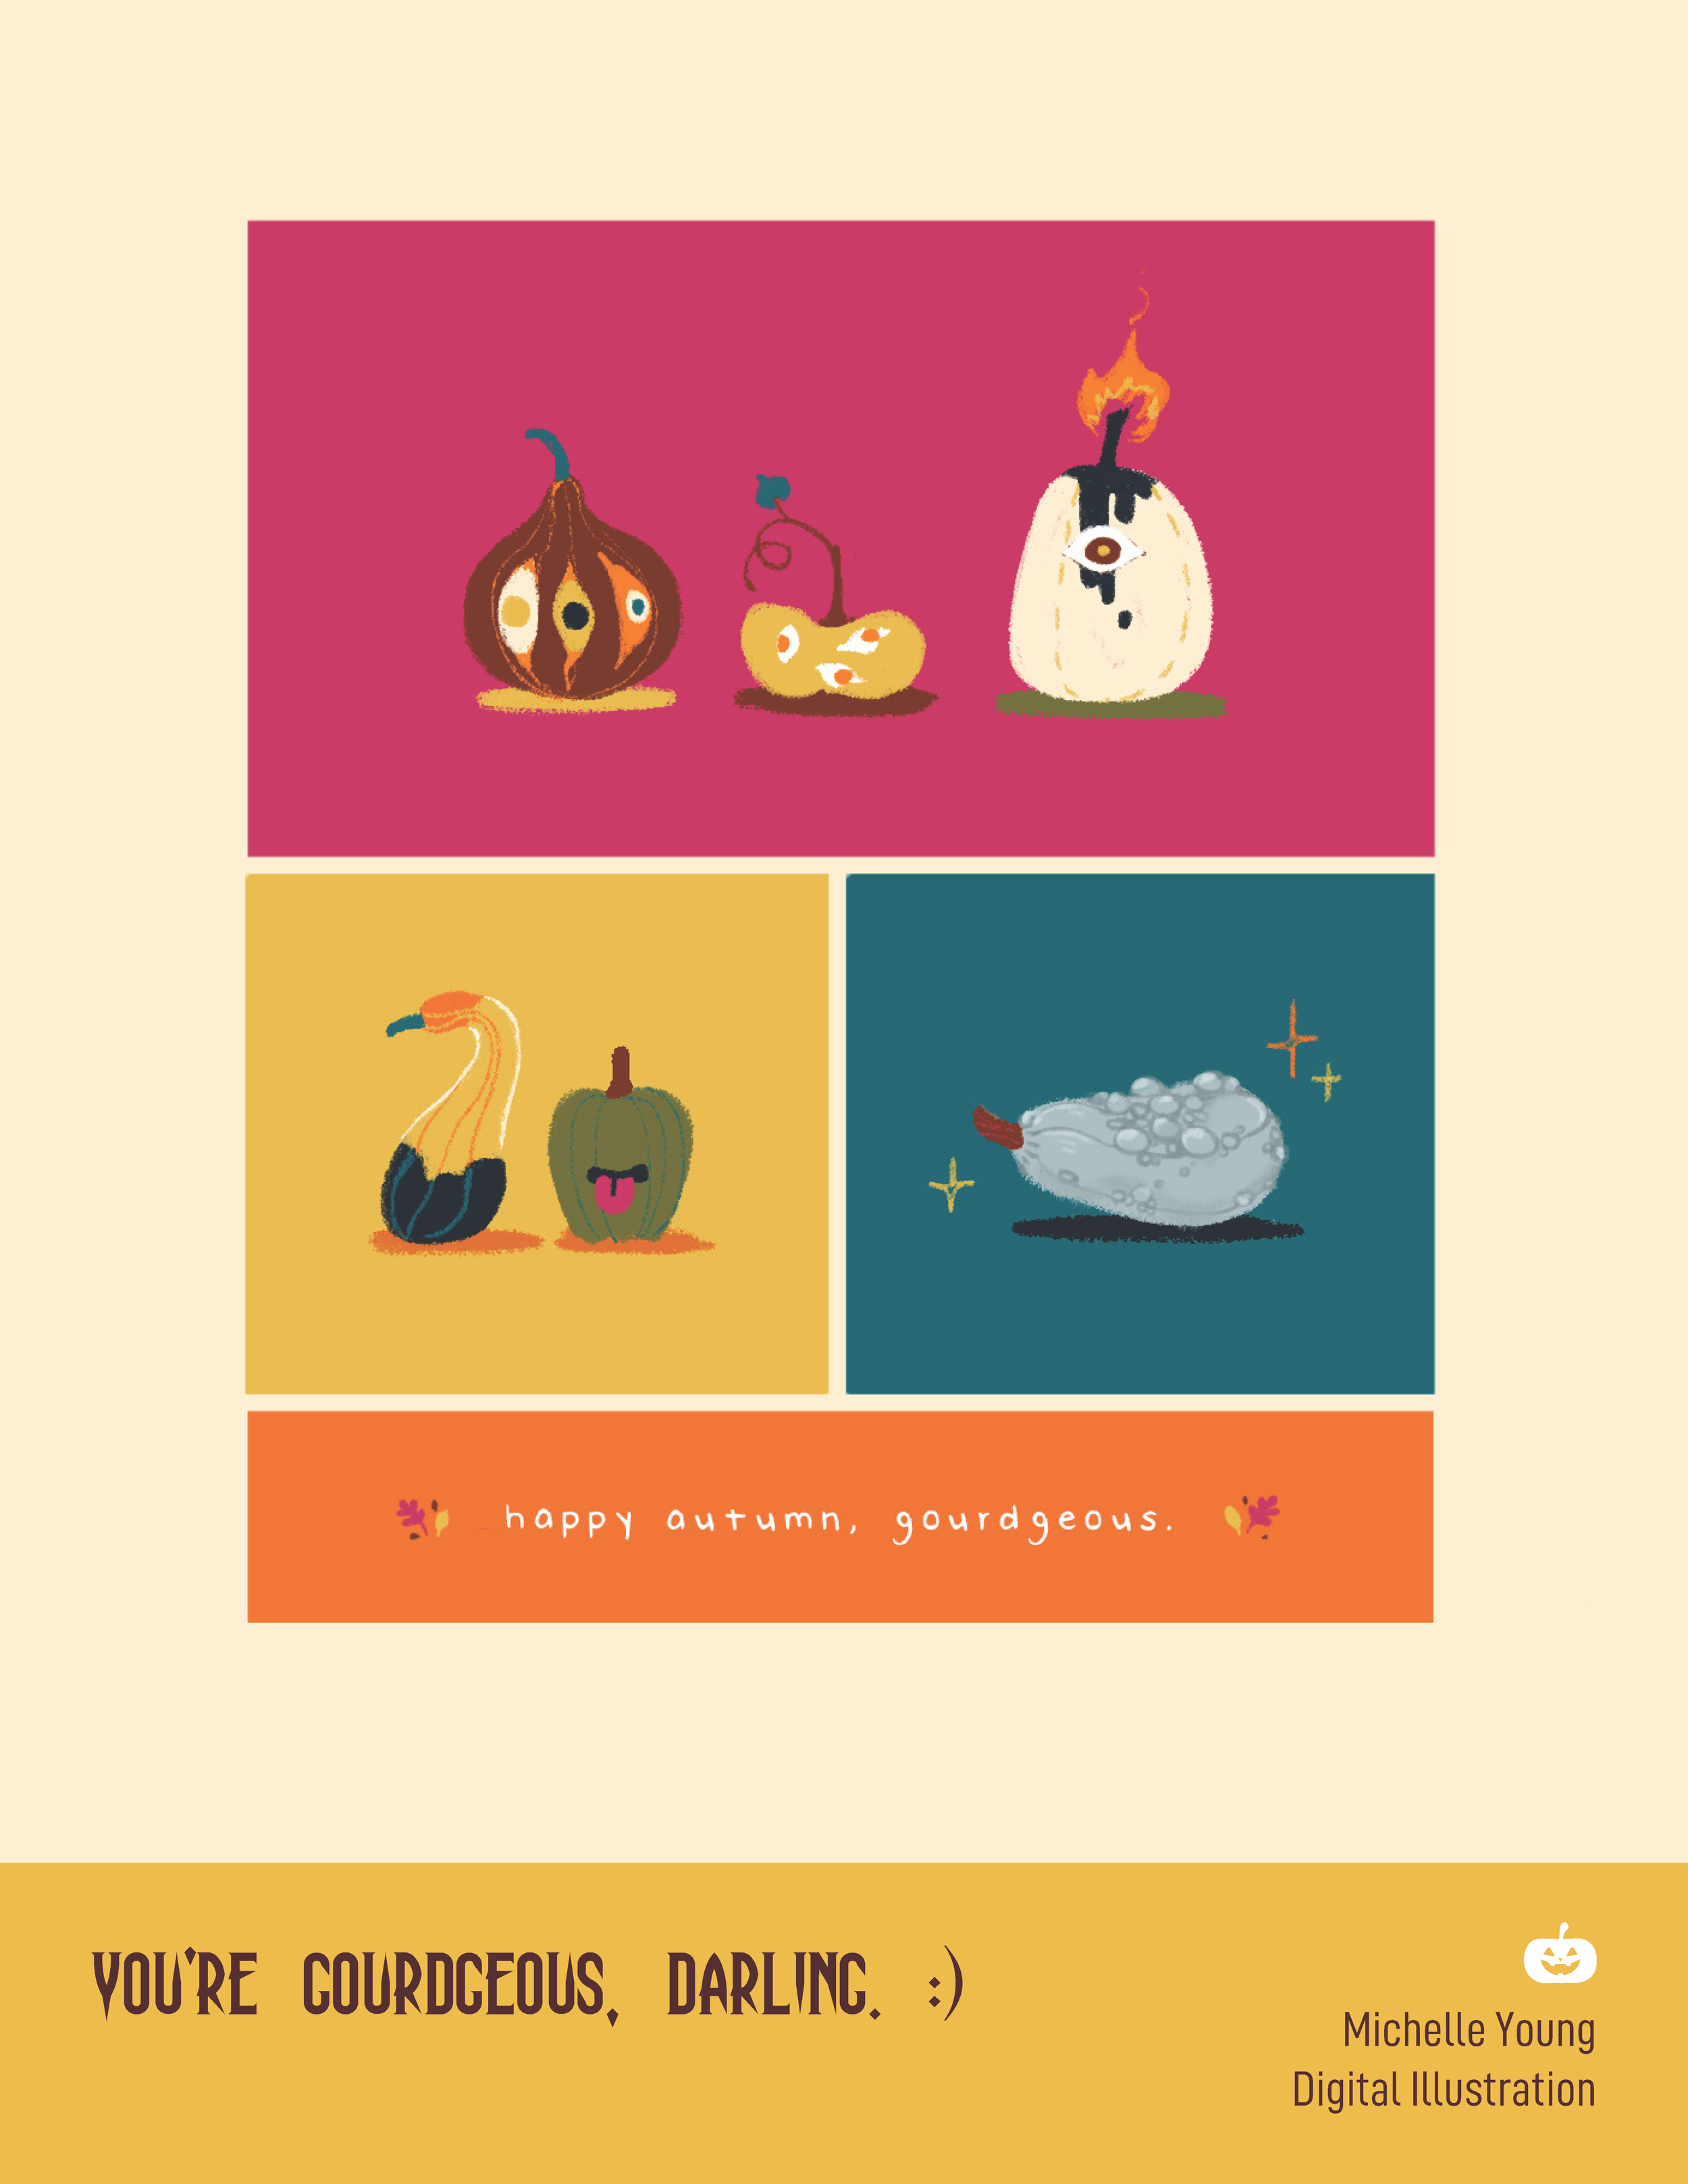 You're Gourdgeous, Darling. :) by Michelle Young